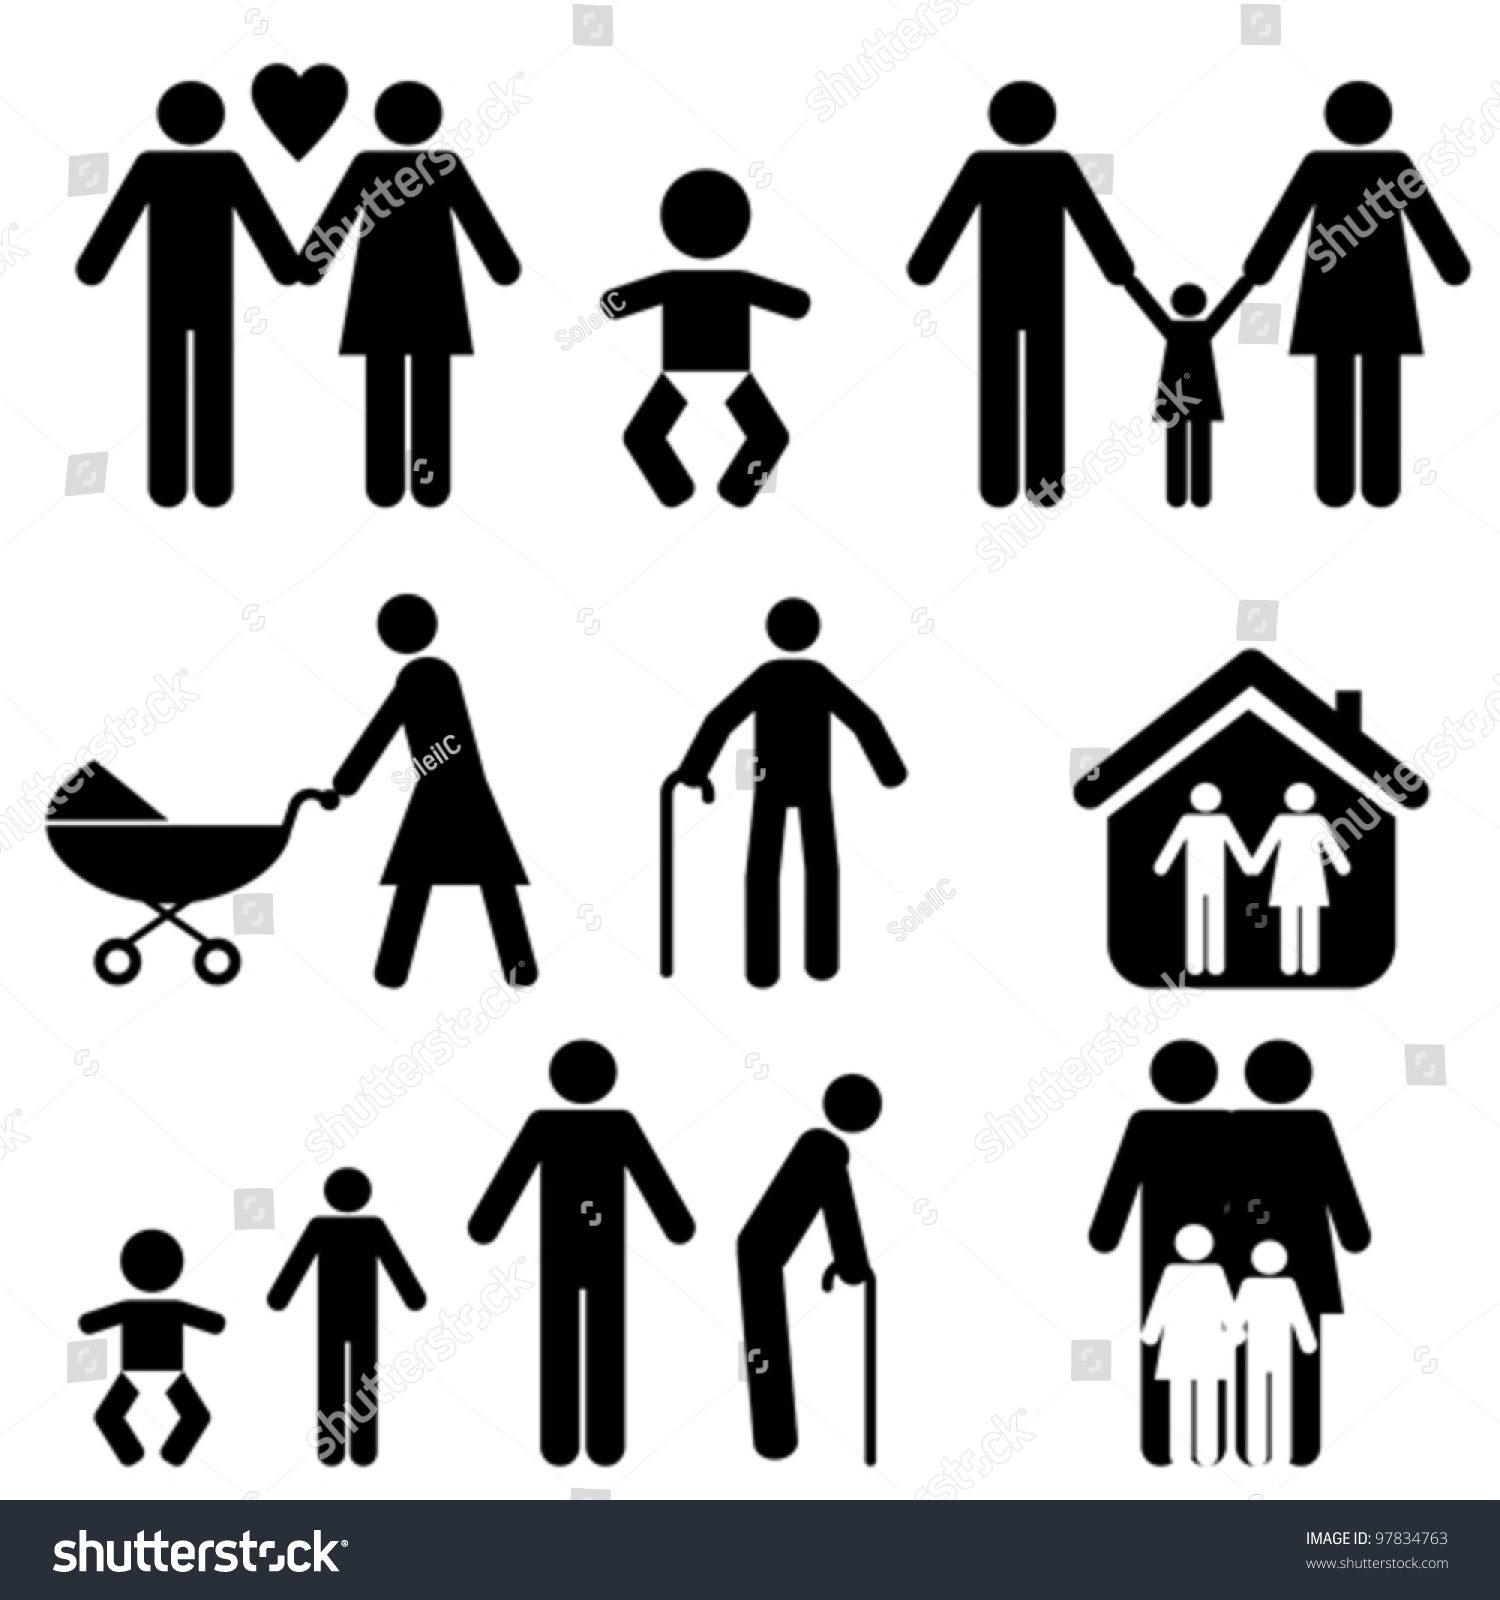 Family Life Icon Set Stock Vector (Royalty Free) 97834763 | Shutterstock